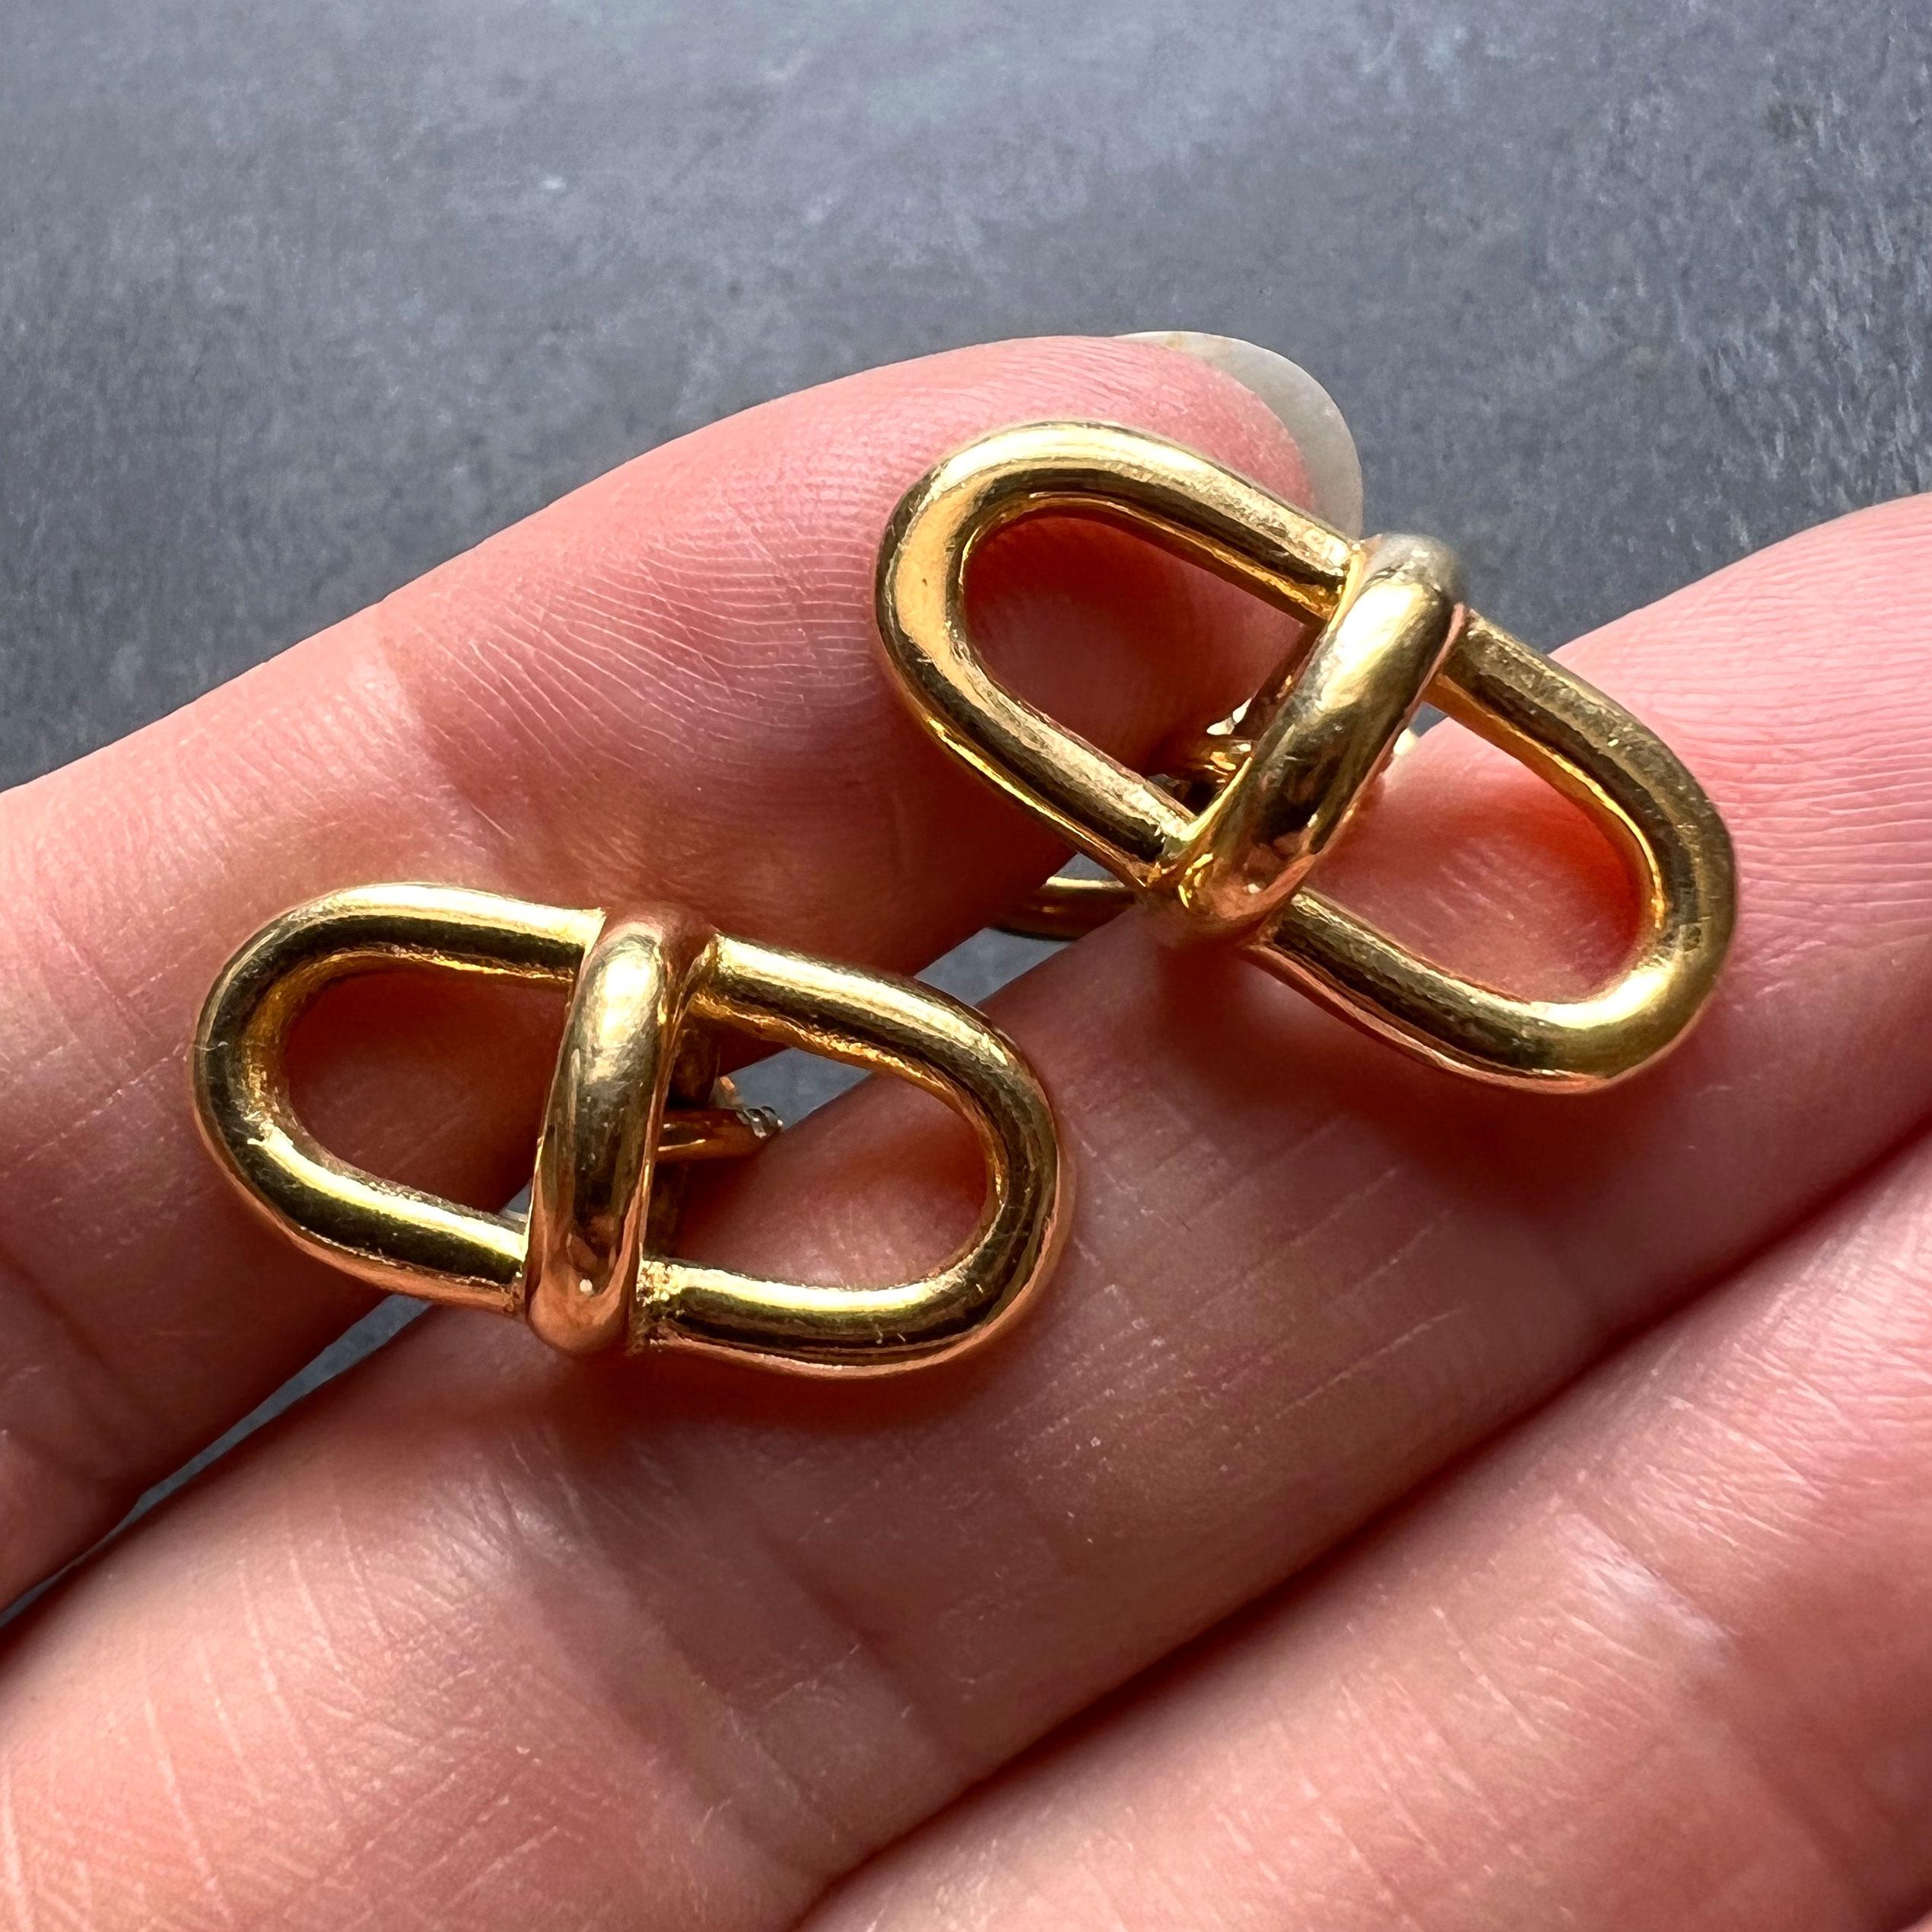 A pair of 18K (18 karat) yellow gold cufflinks each designed as a pair of links from a marine chain. Stamped with the owl for French import and 18 karat gold.

Dimensions: 2 x 1 x 2.4 cm 
Weight: 13.97 grams
